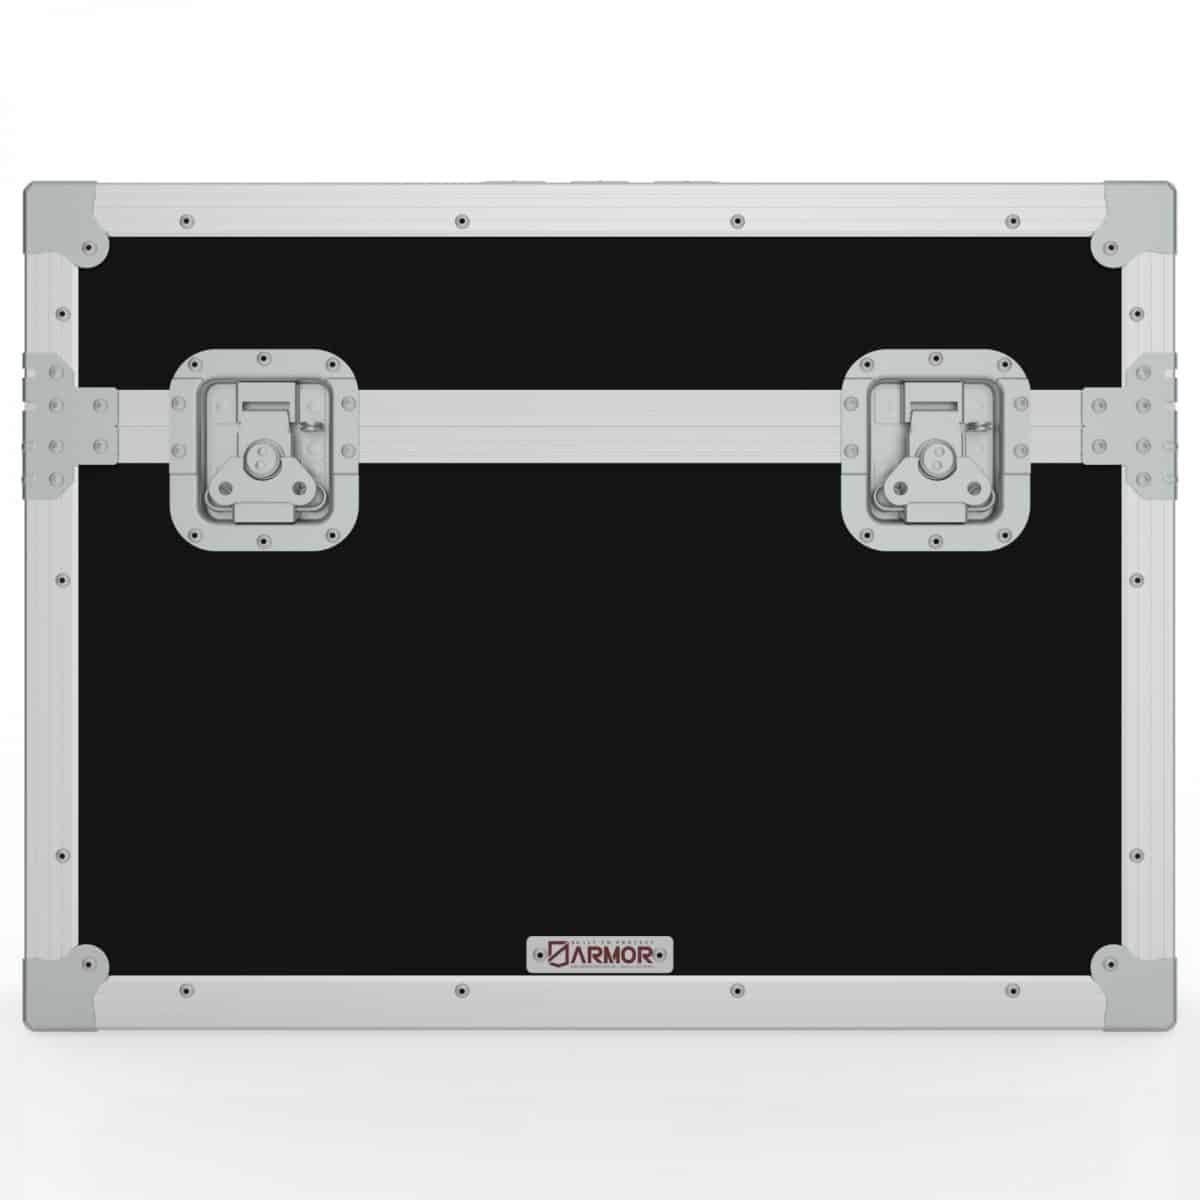 Monitor Display Carry Case for ZunZheng DM240